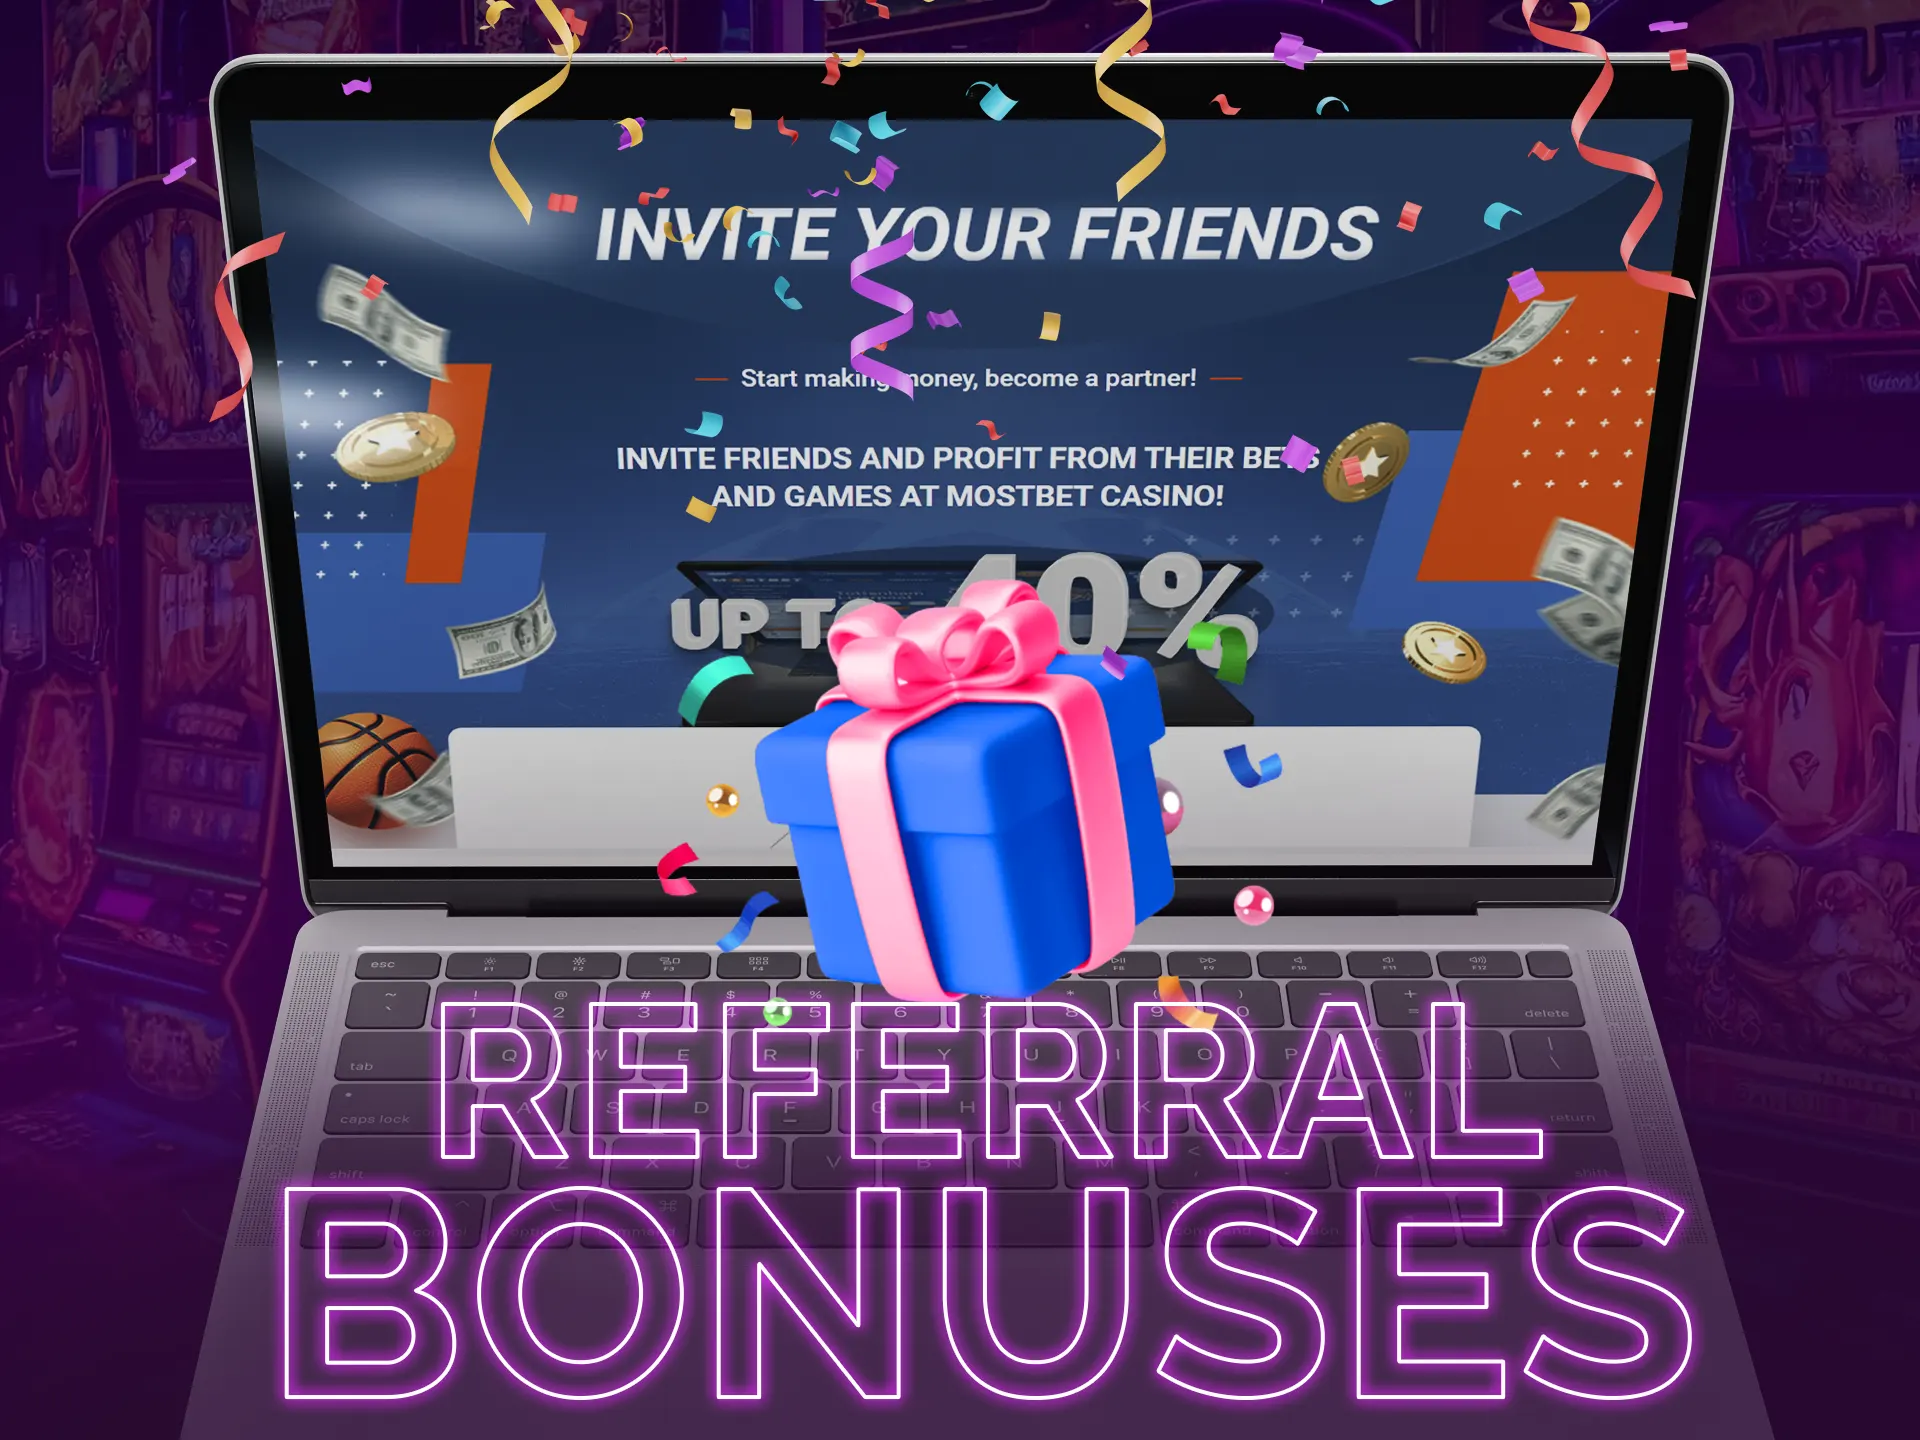 Refer friends, get rewards: players earn bonuses for introducing friends to online casinos, enhancing gaming enjoyment.